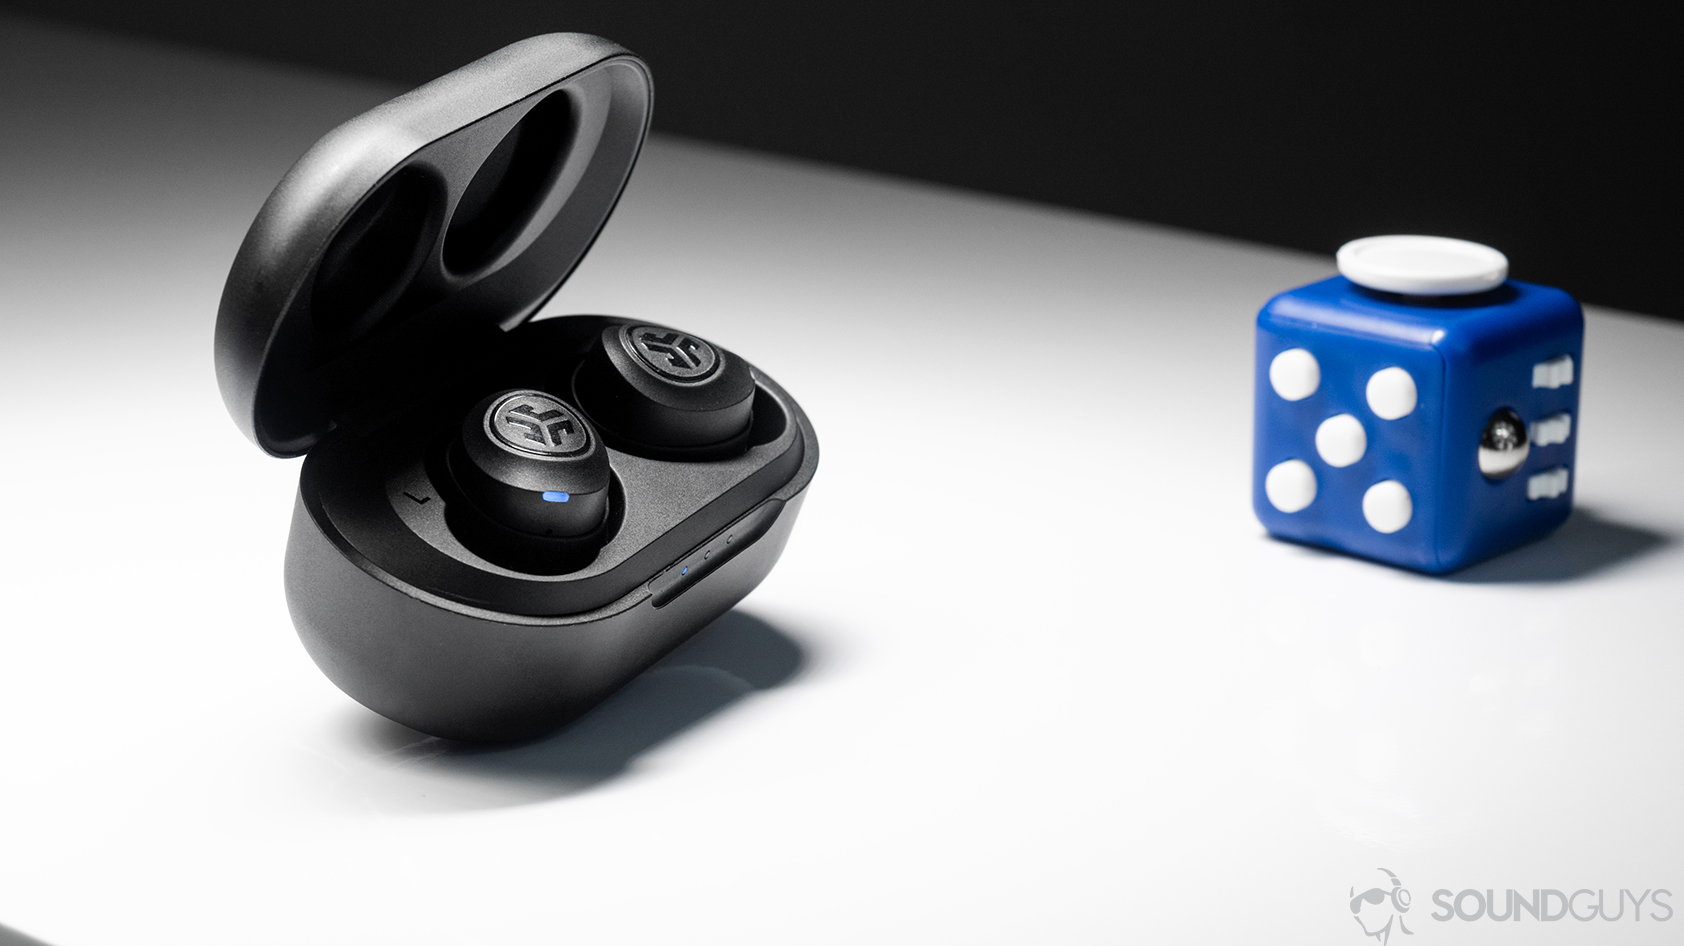 JLab  JBuds Air true wireless: The earbuds in the case which is open and angled away (slightly) from the lens.